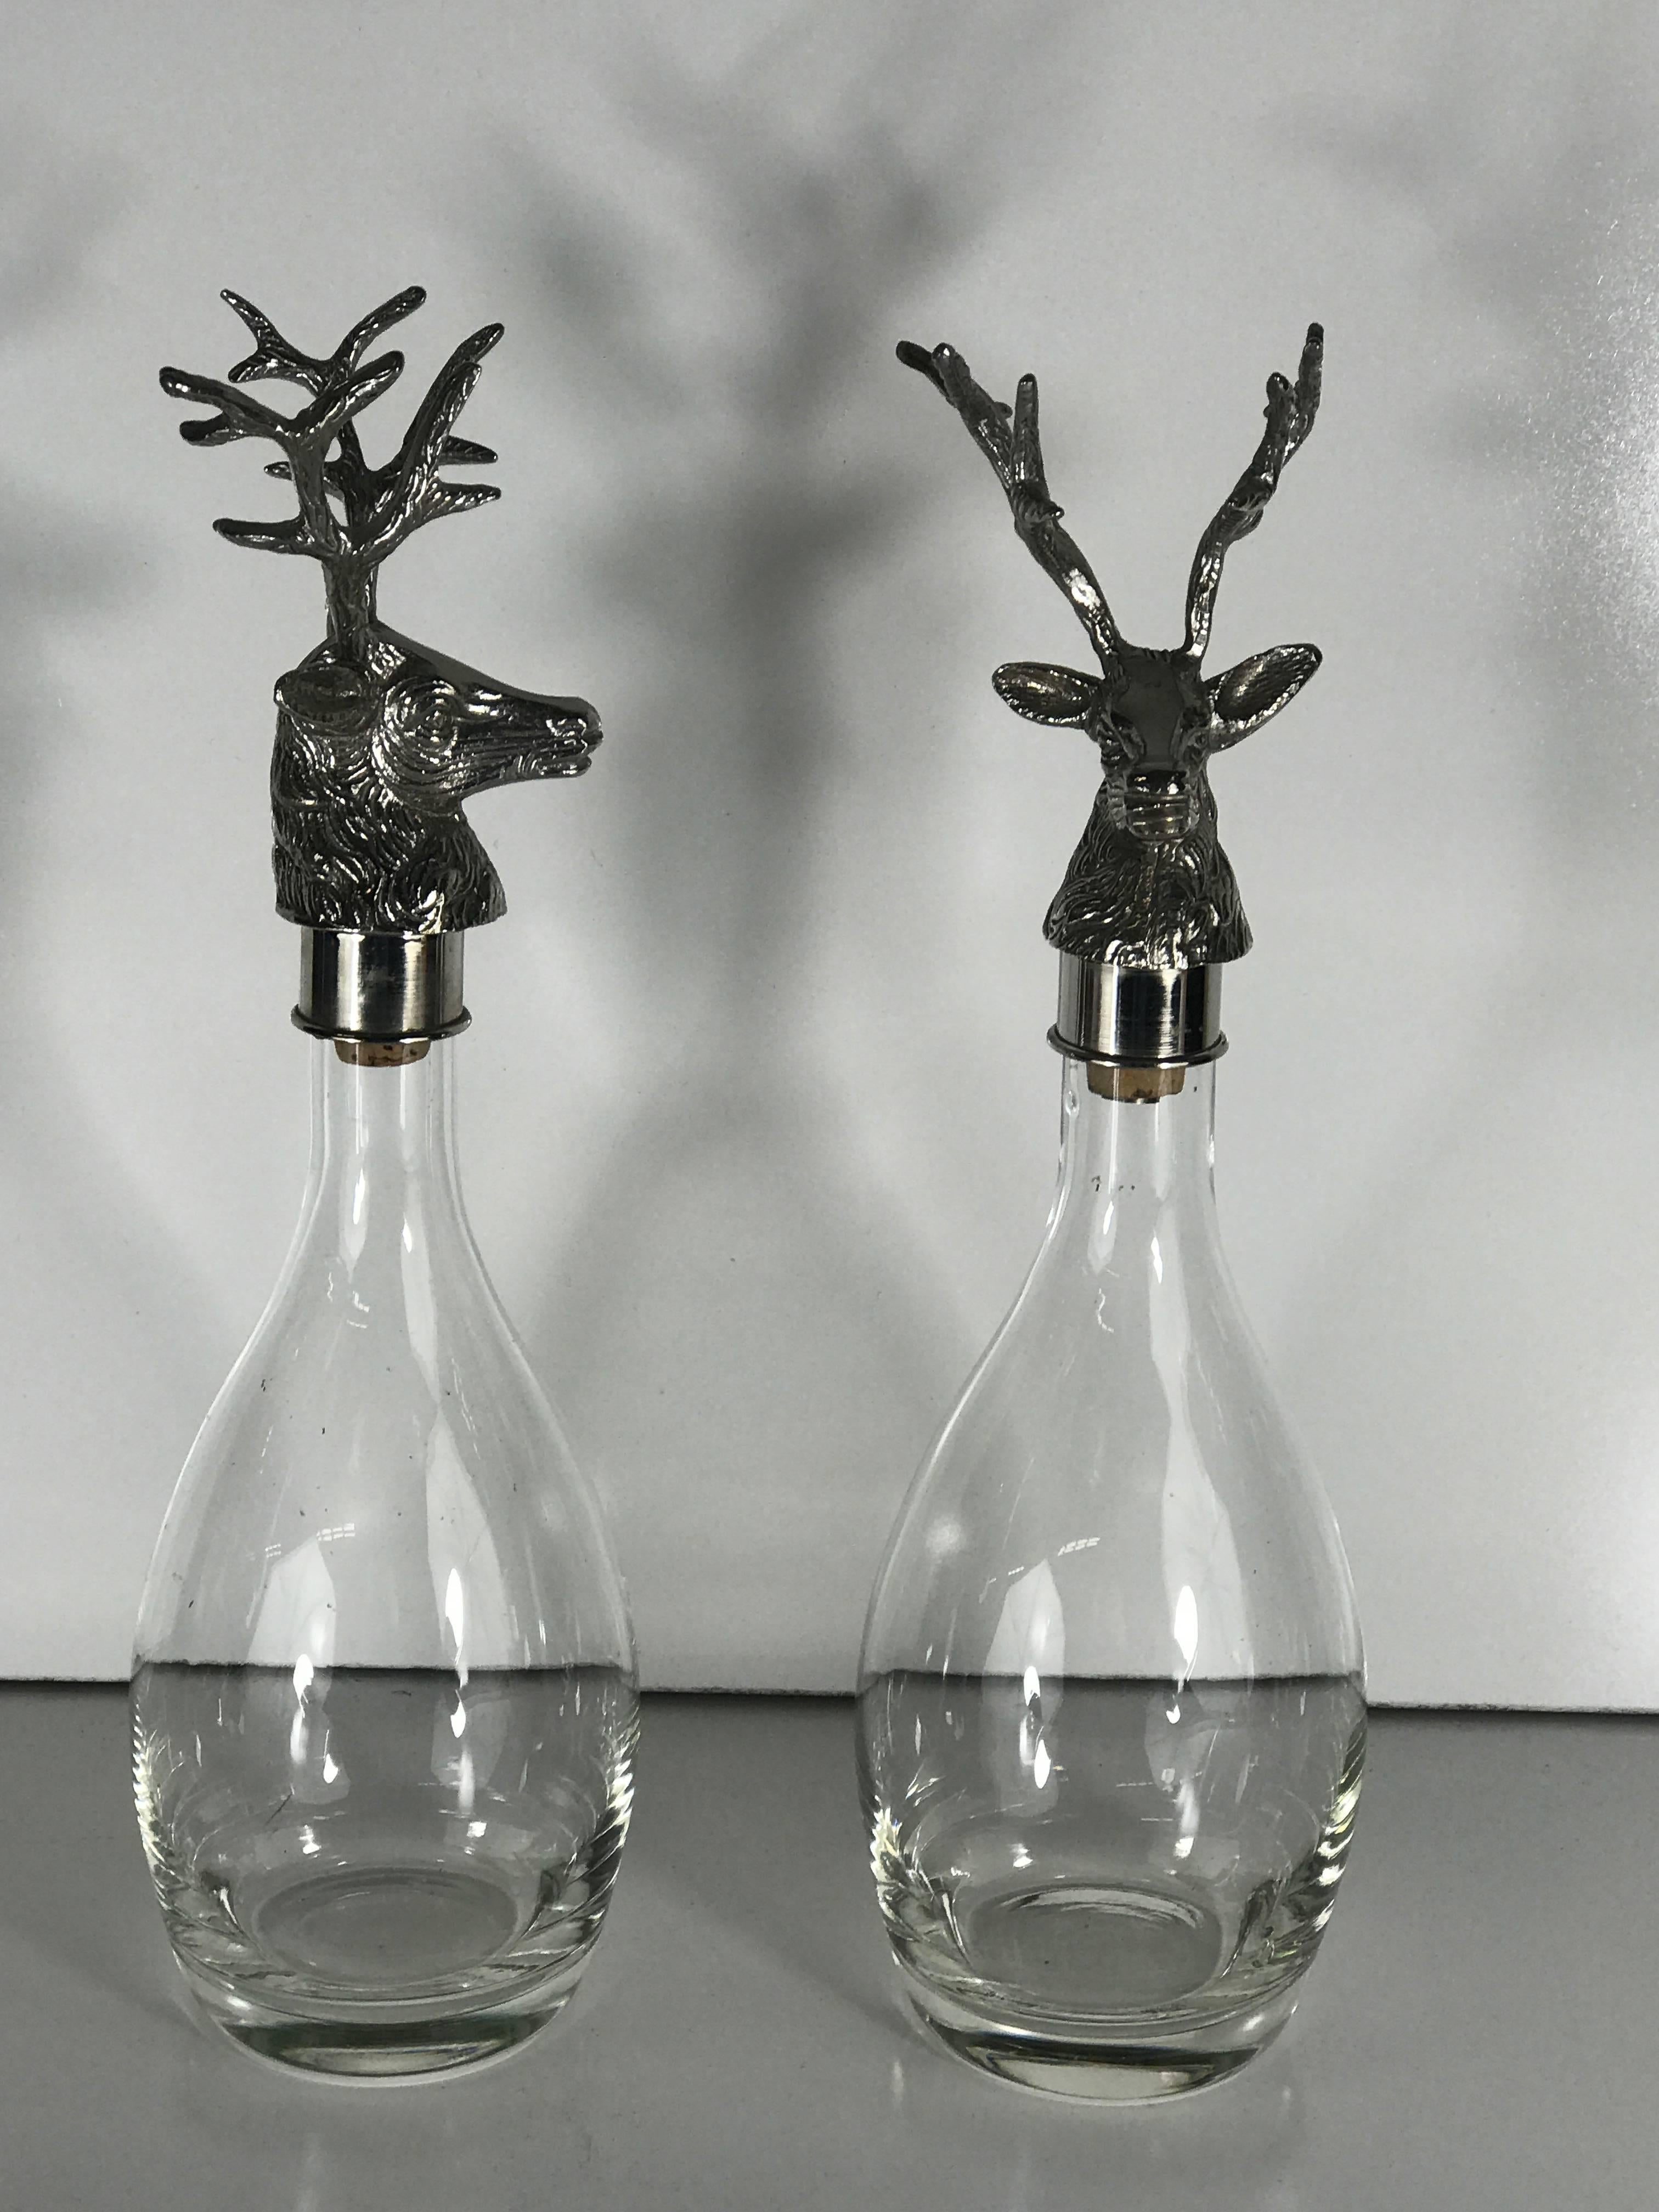 Pair of Arthur Court stag motif decanters, each one with a large and heavy cast stag head with a crystal decanter.
This item is at our Atlanta GA, Location, not Palm Beach.
